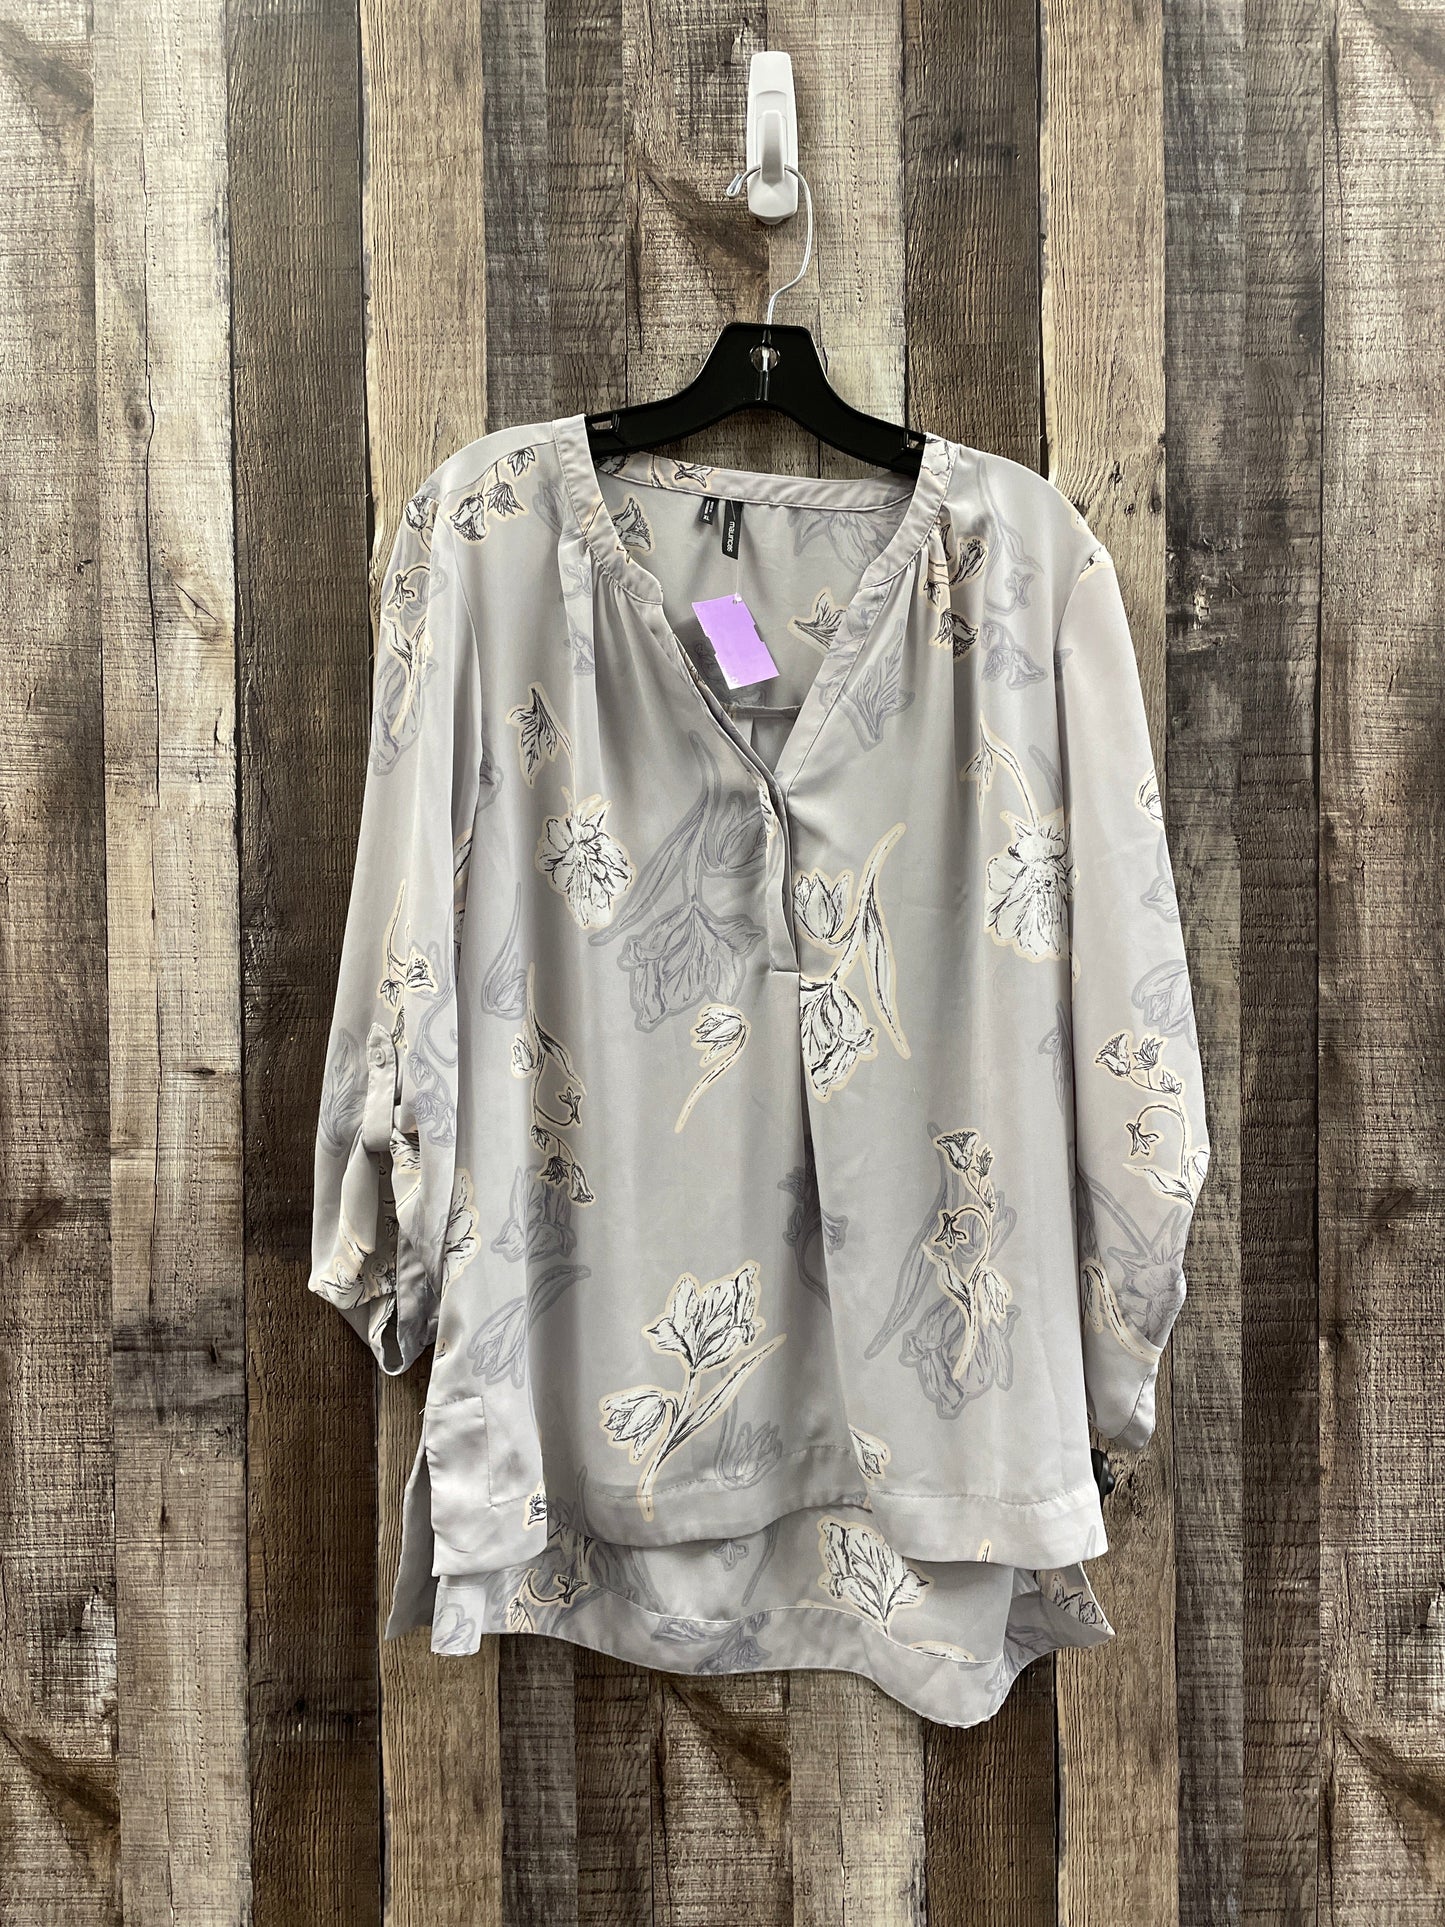 Floral Print Top Long Sleeve Maurices, Size Xl